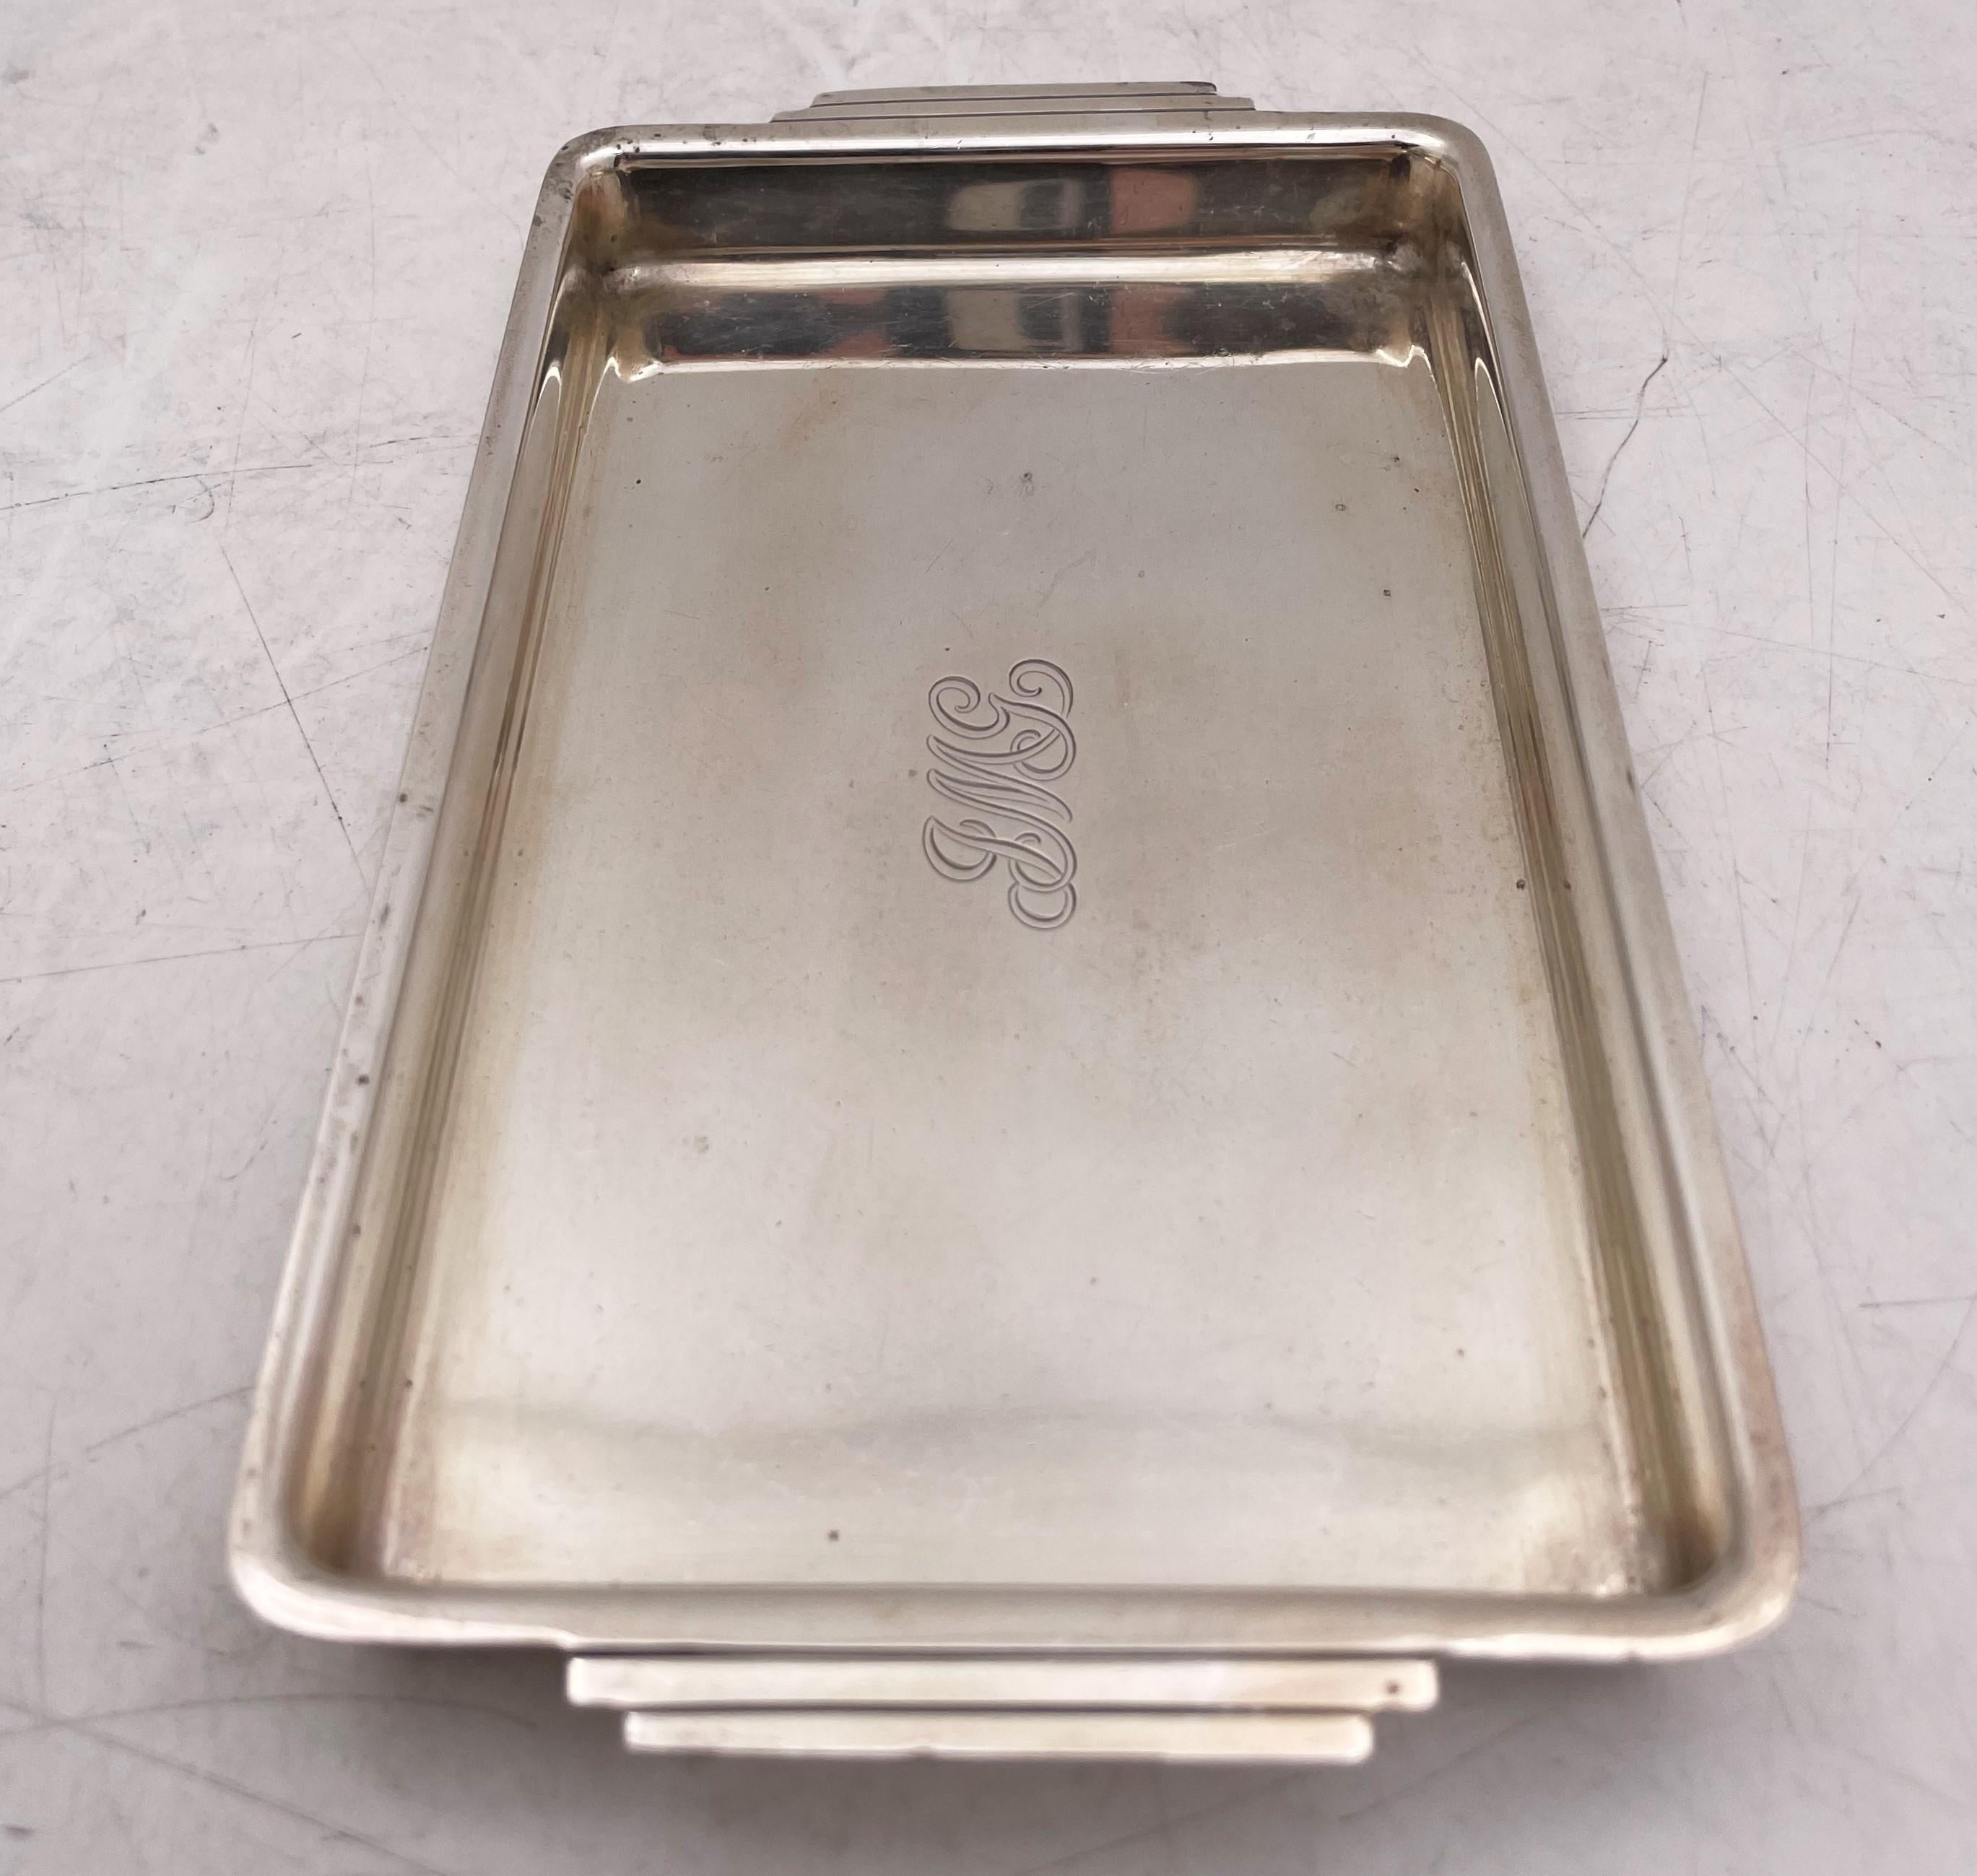 Tiffany & Co. sterling silver trinket tray or dish in Art Deco style and in pattern number 22326 from 1936 with elegant handles. It measures 6 1/2'' in length from handle to handle by 3 5/8'' in width by 1/2'' in height, weighs 5.5 troy ounces, and